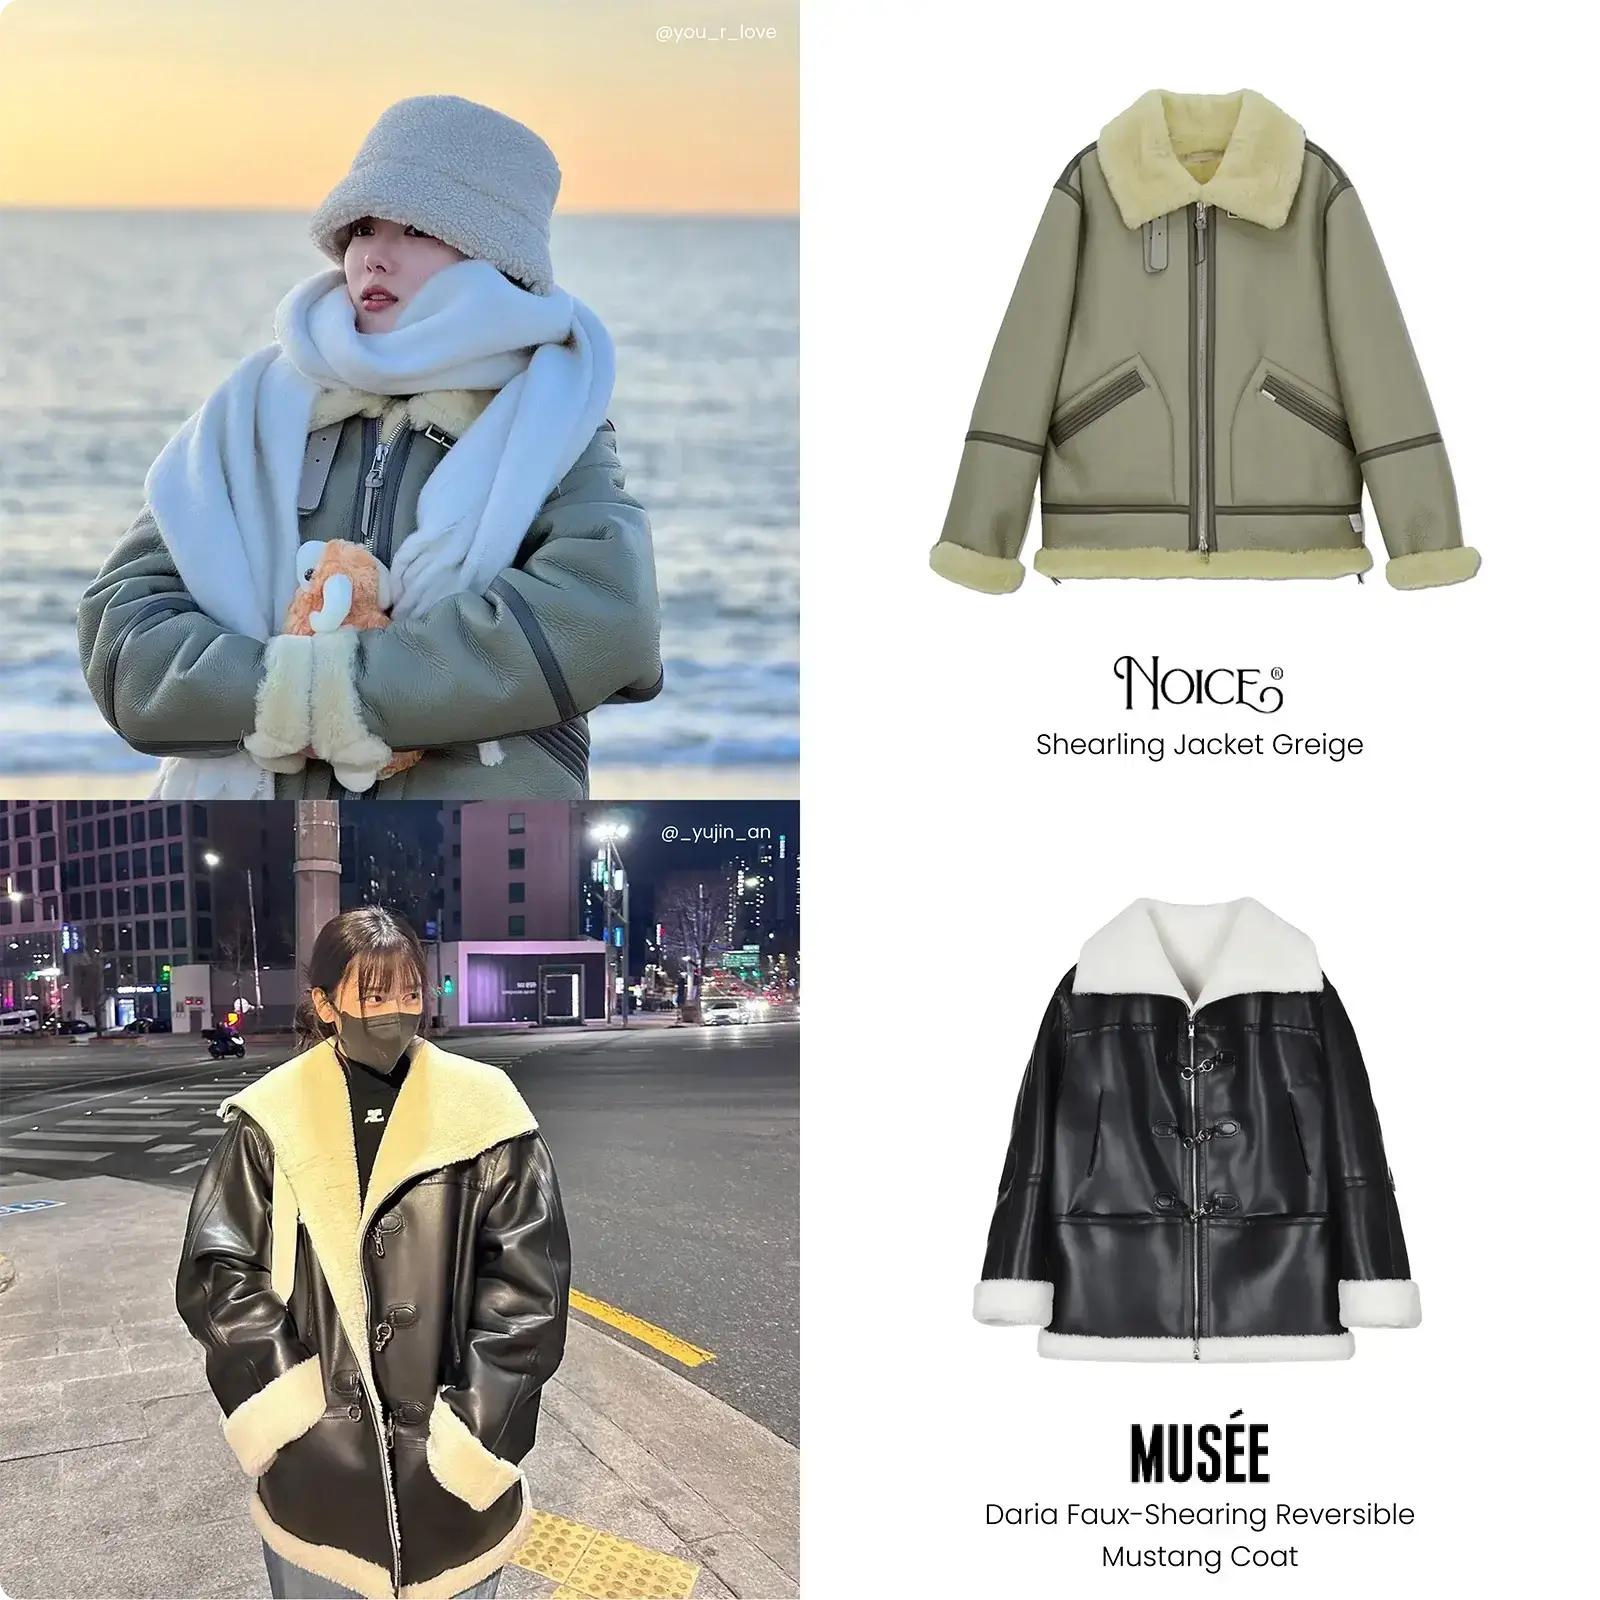 Korean shearling jackets from Noice and Musee